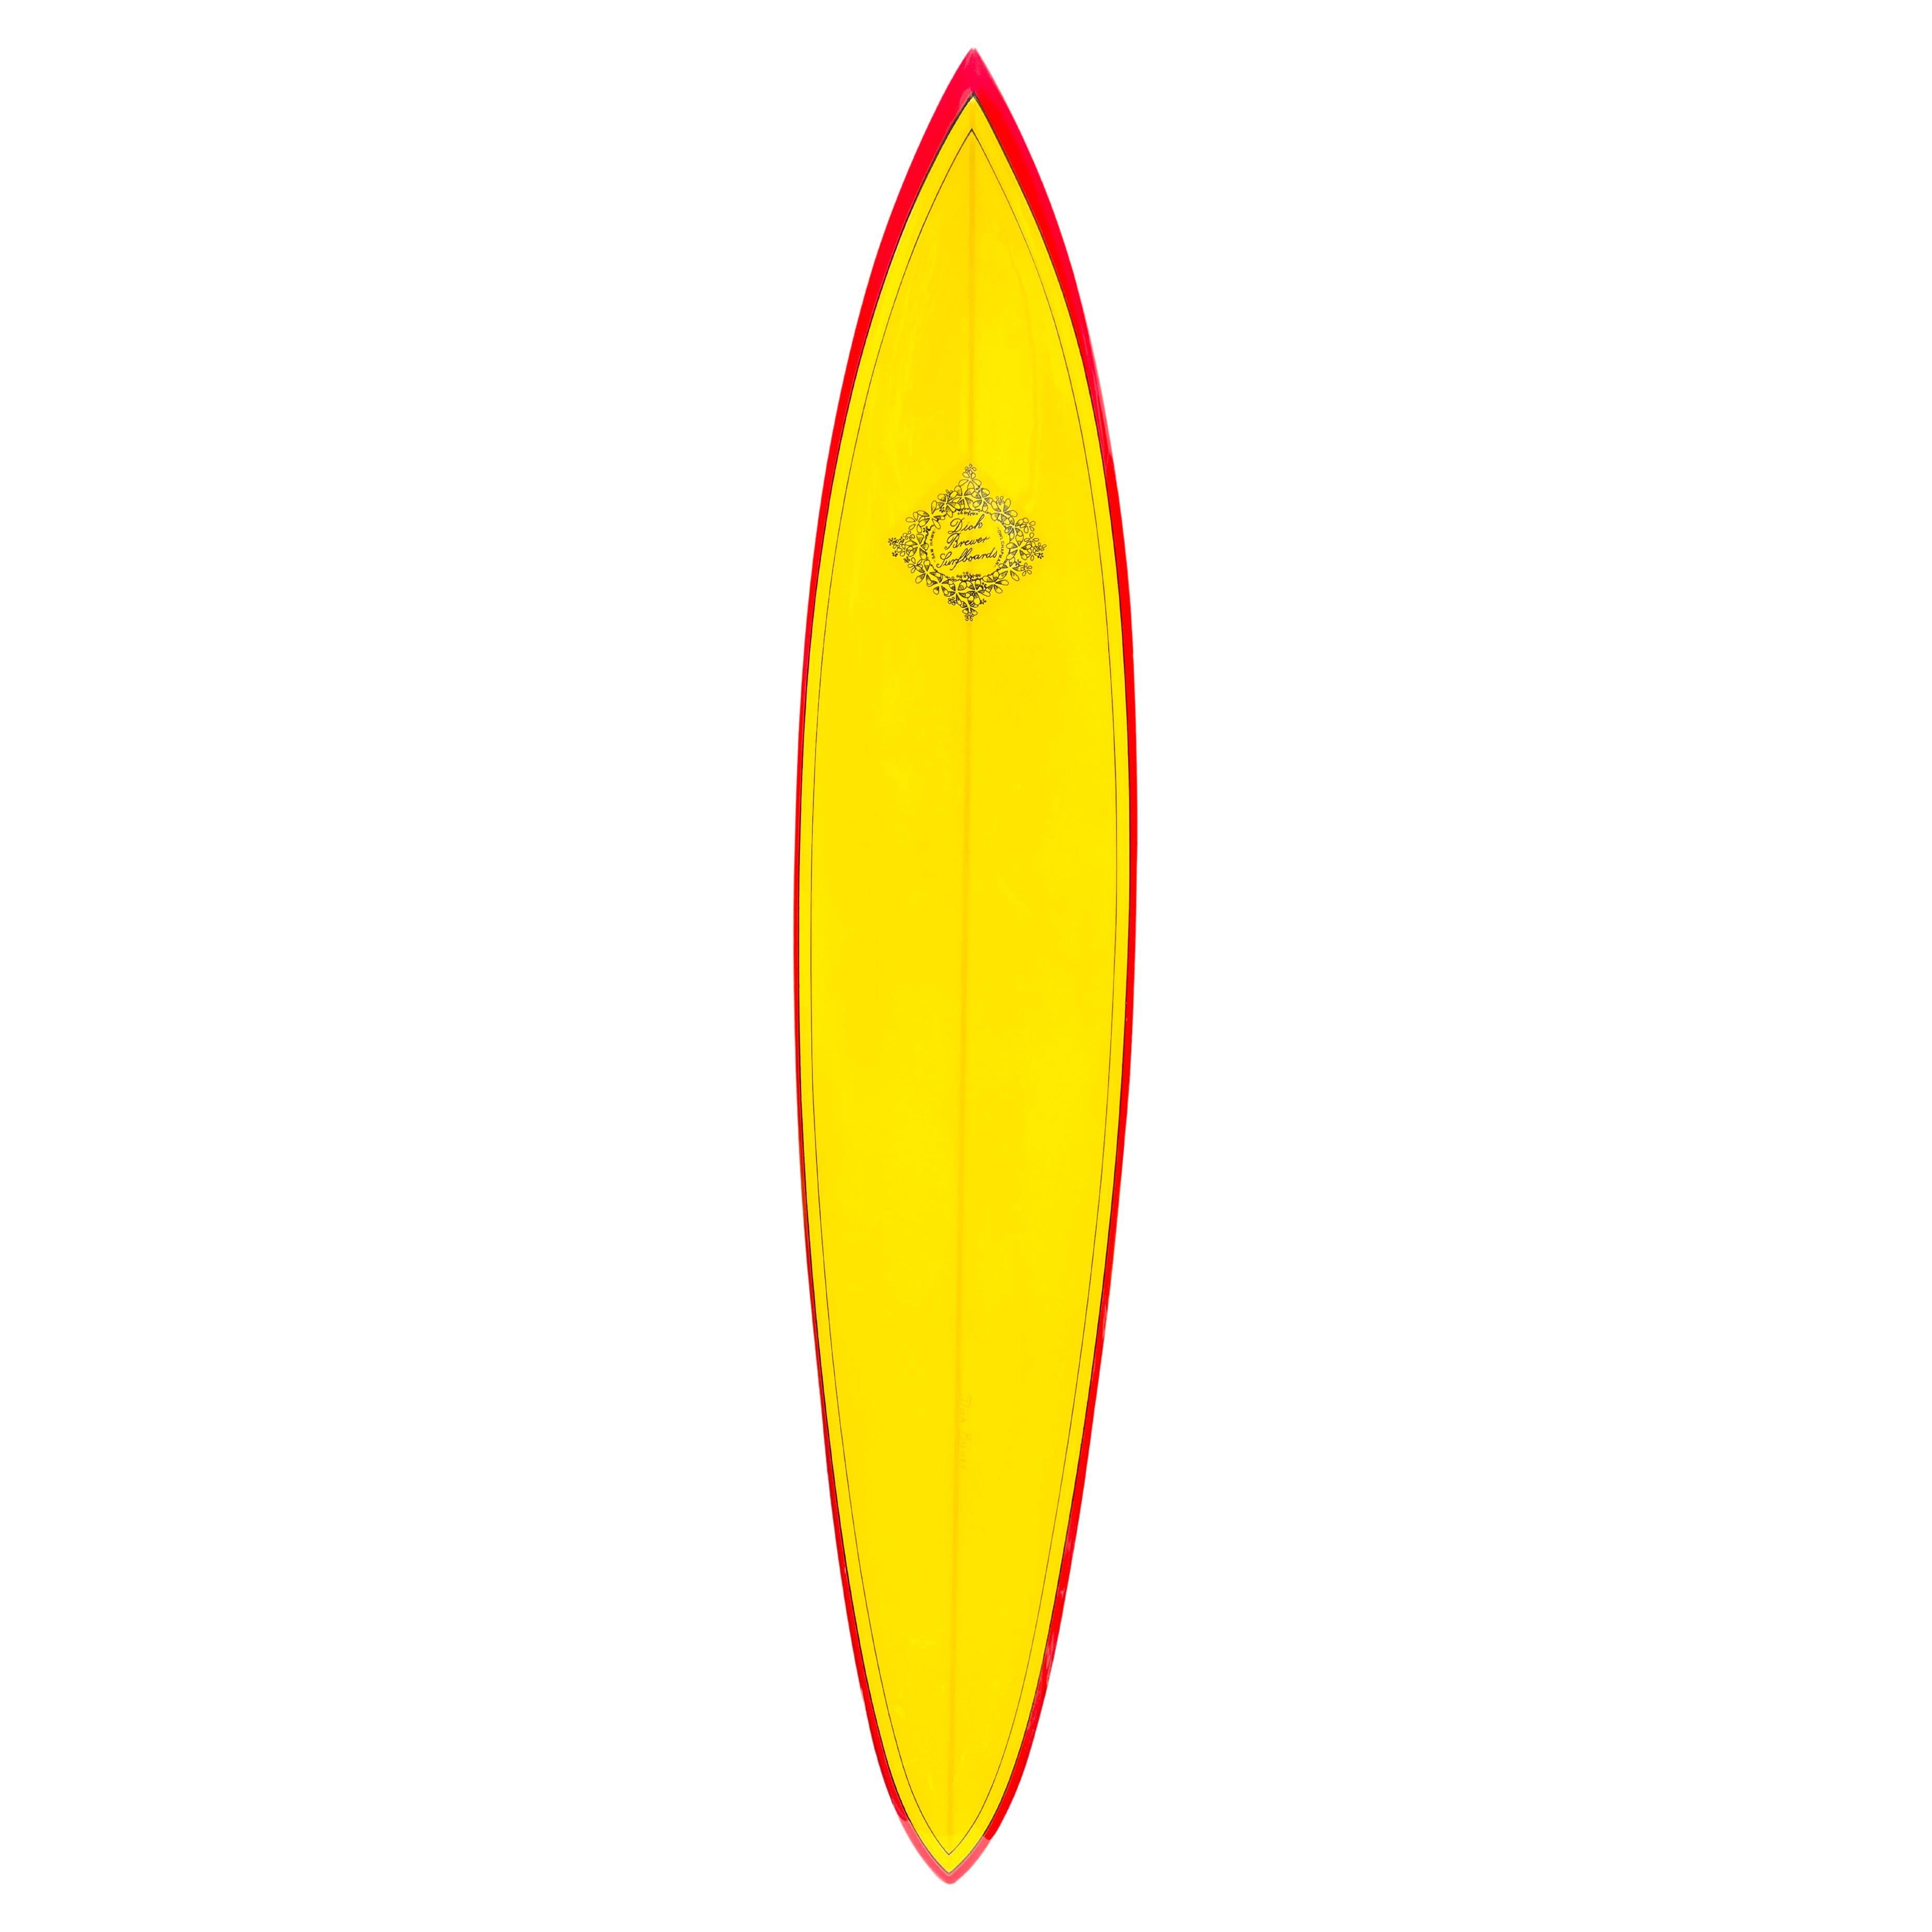 1968 Replica Lahaina Clinton Blears model surfboard by Dick Brewer For Sale